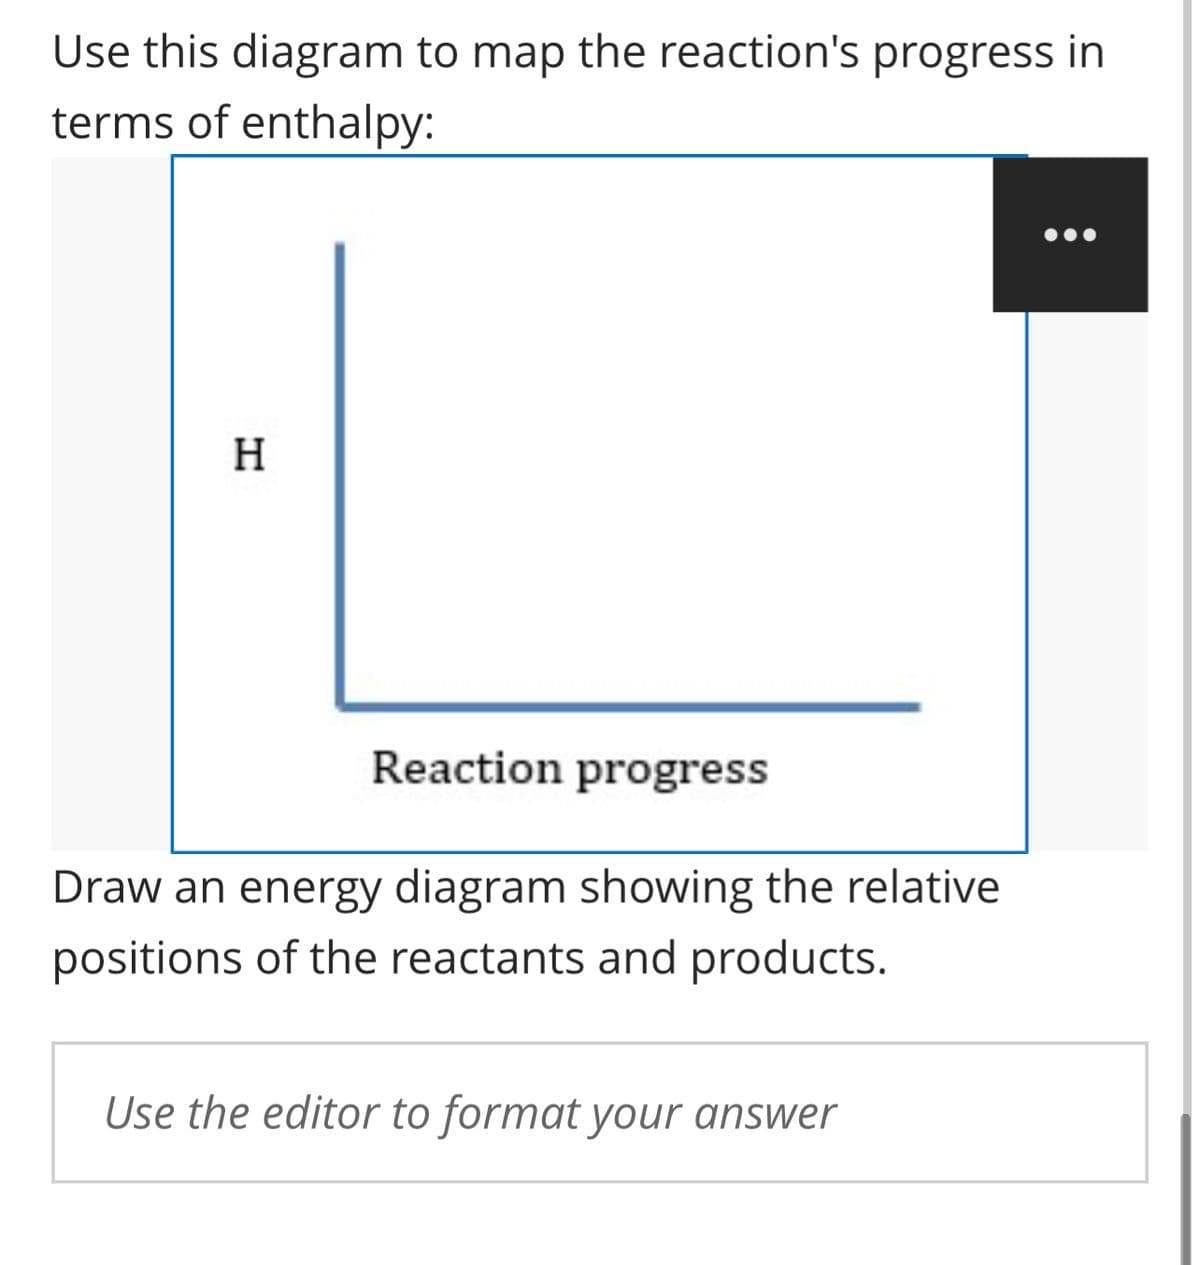 Use this diagram to map the reaction's progress in
terms of enthalpy:
H
Reaction progress
Draw an energy diagram showing the relative
positions of the reactants and products.
Use the editor to format your answer